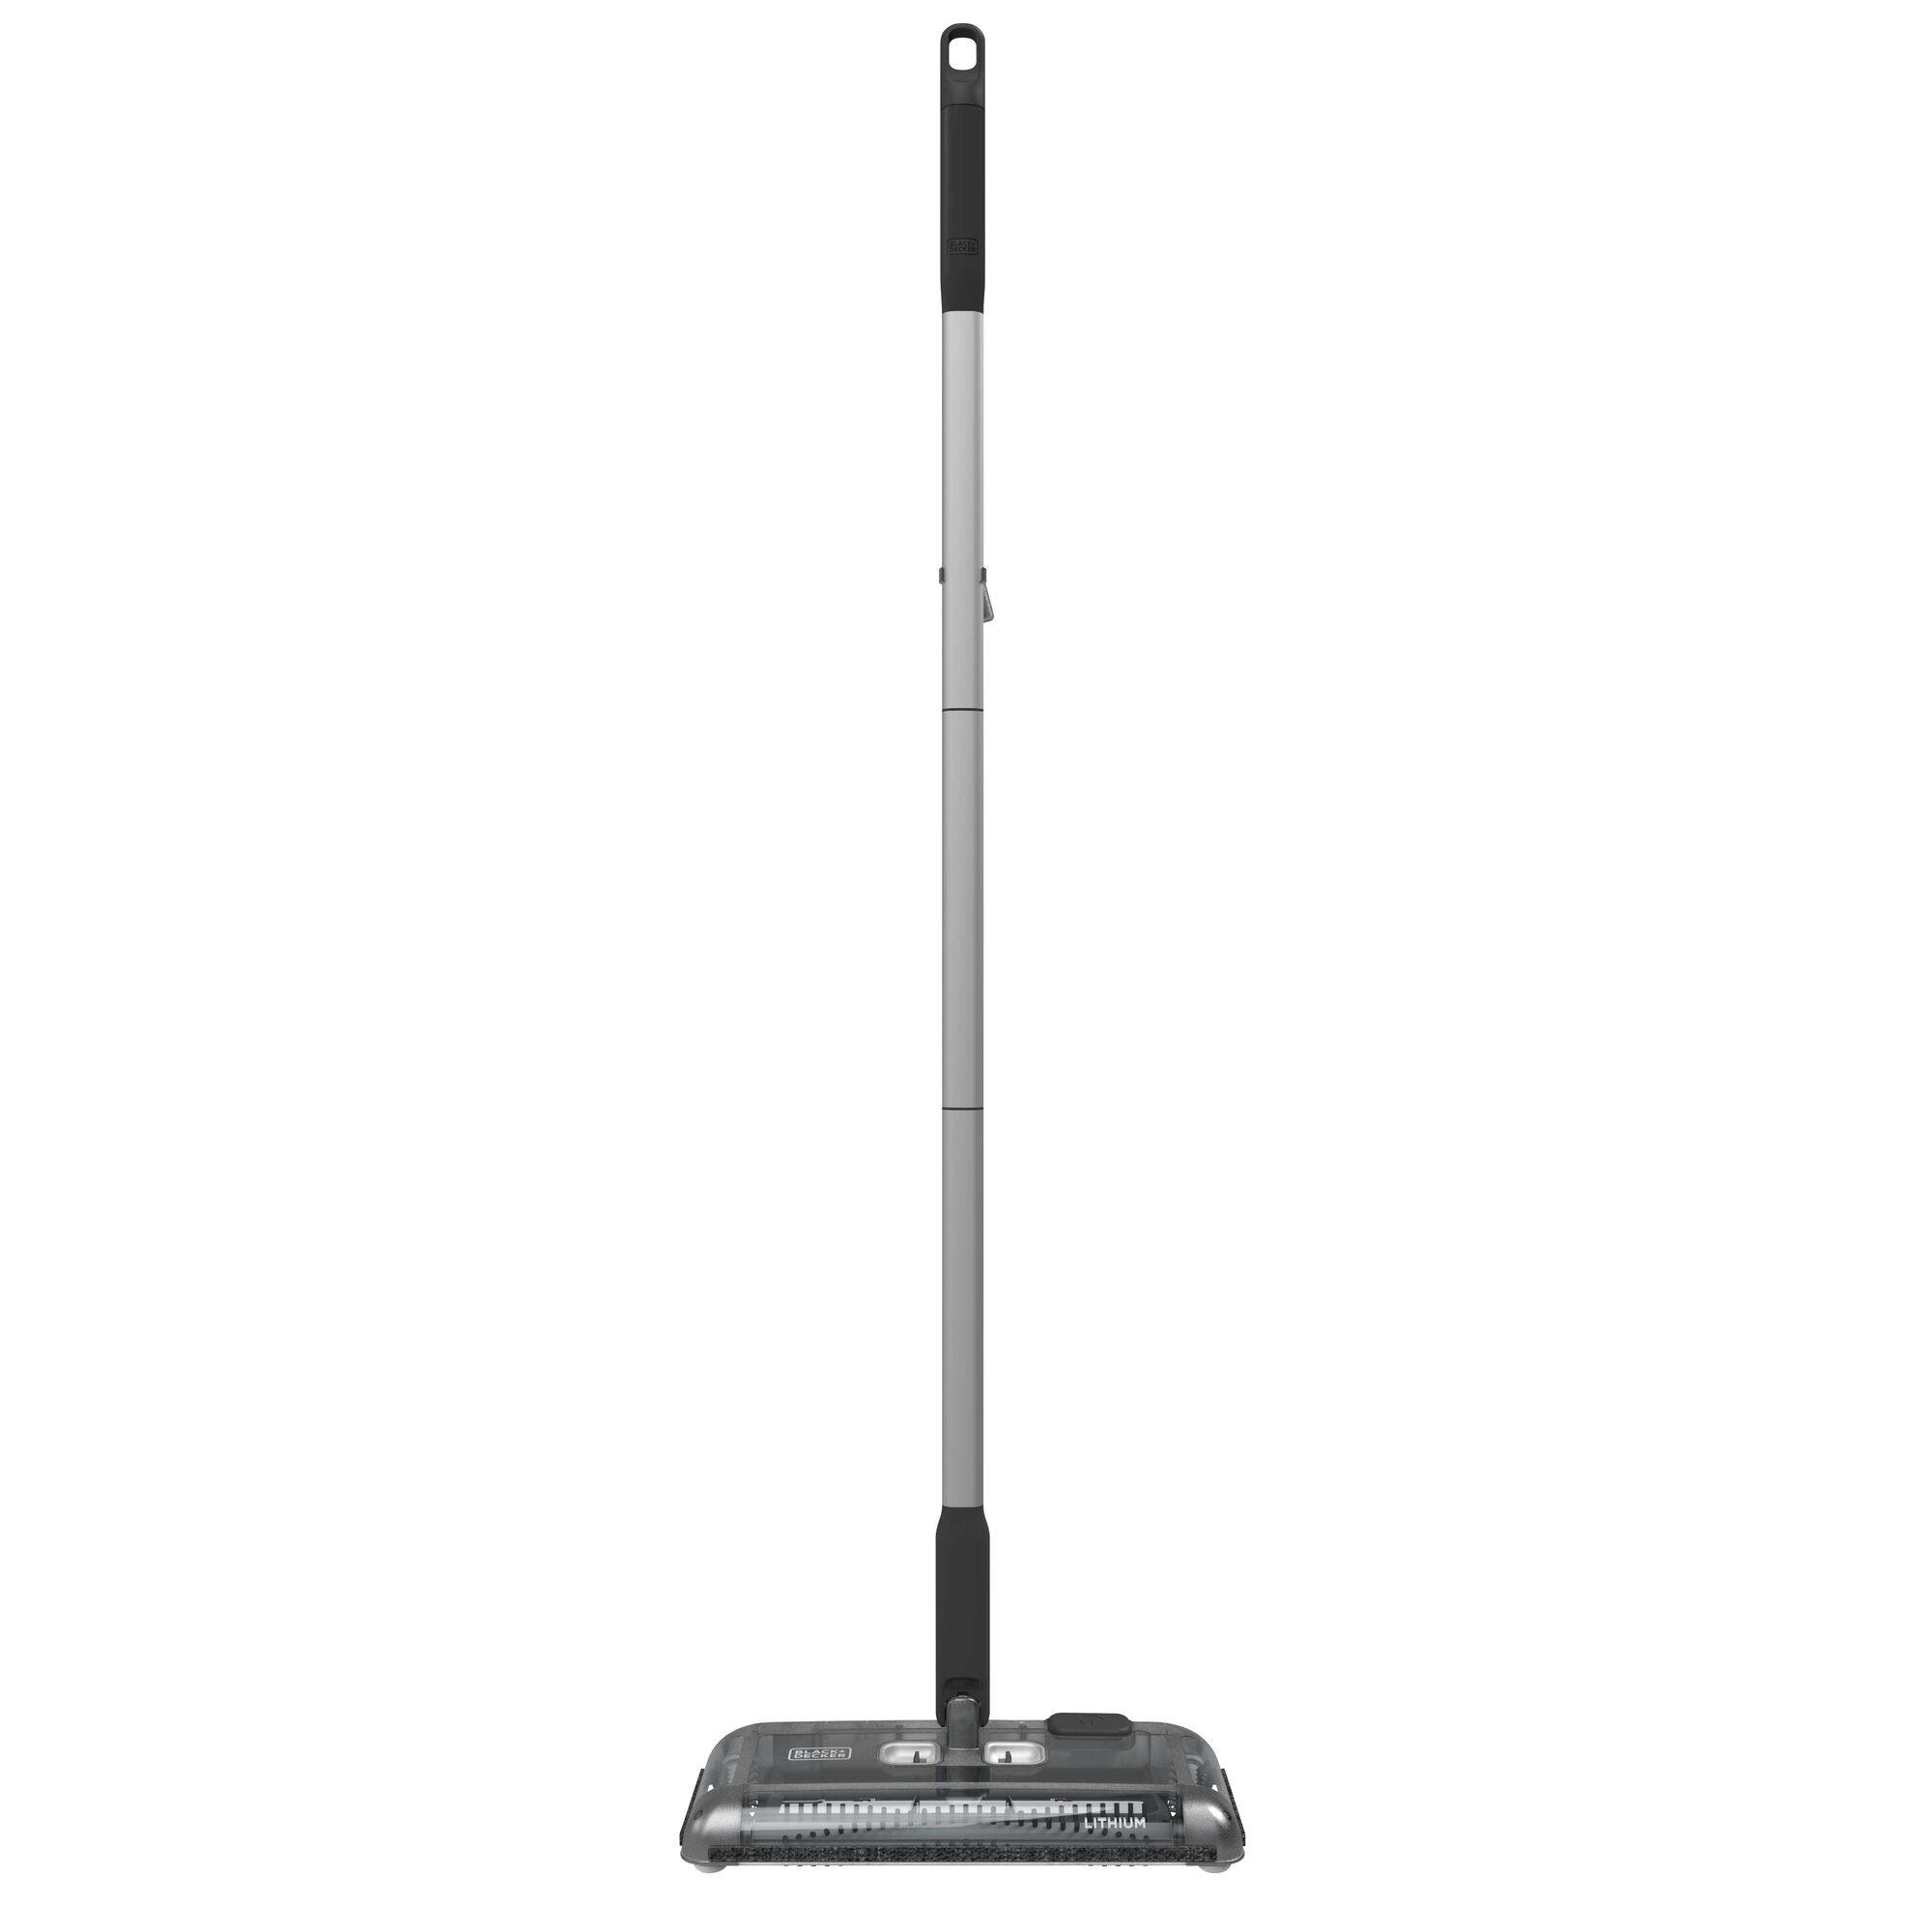 Profile of 100 minutes powered floor sweeper.